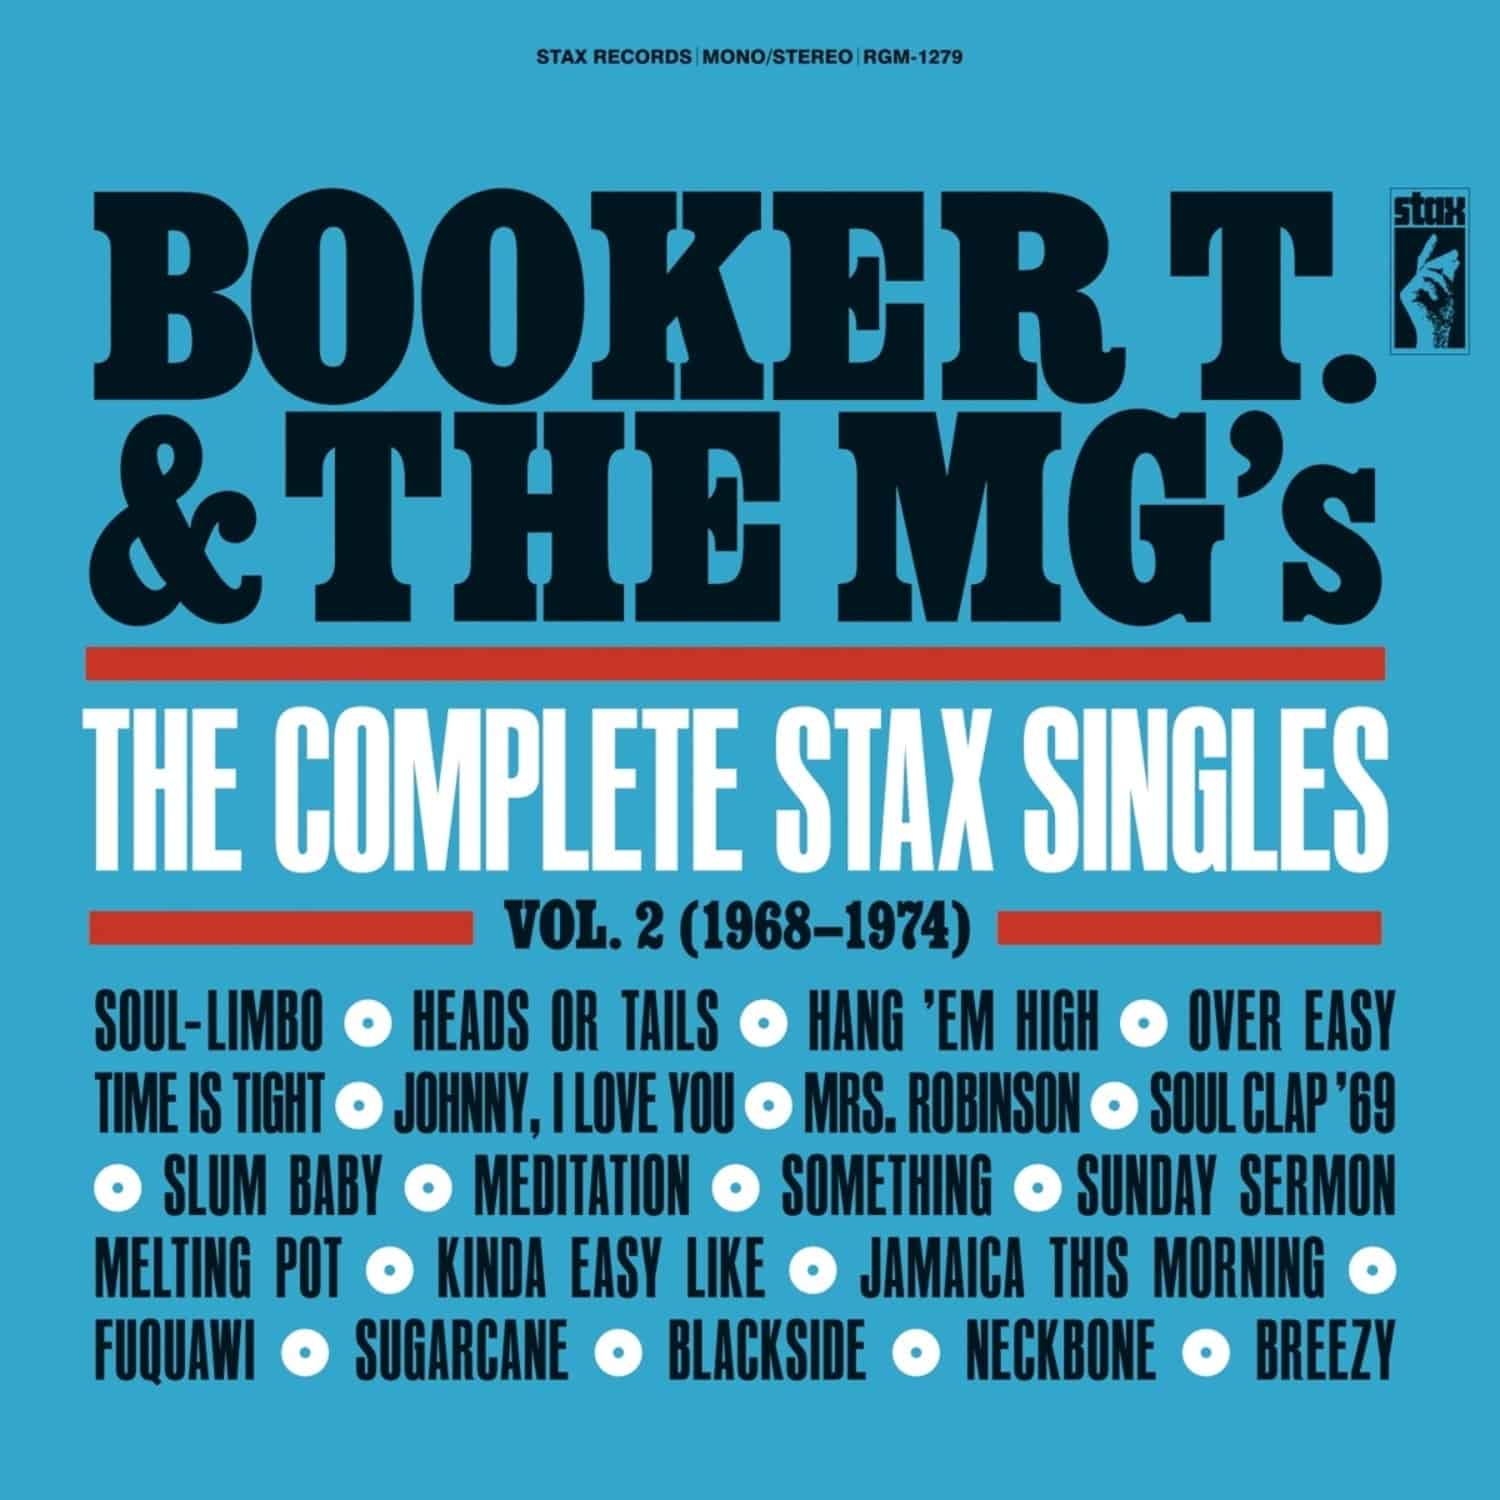 Booker T & The MG s - COMPLETE STAX SINGLES VOL.2 